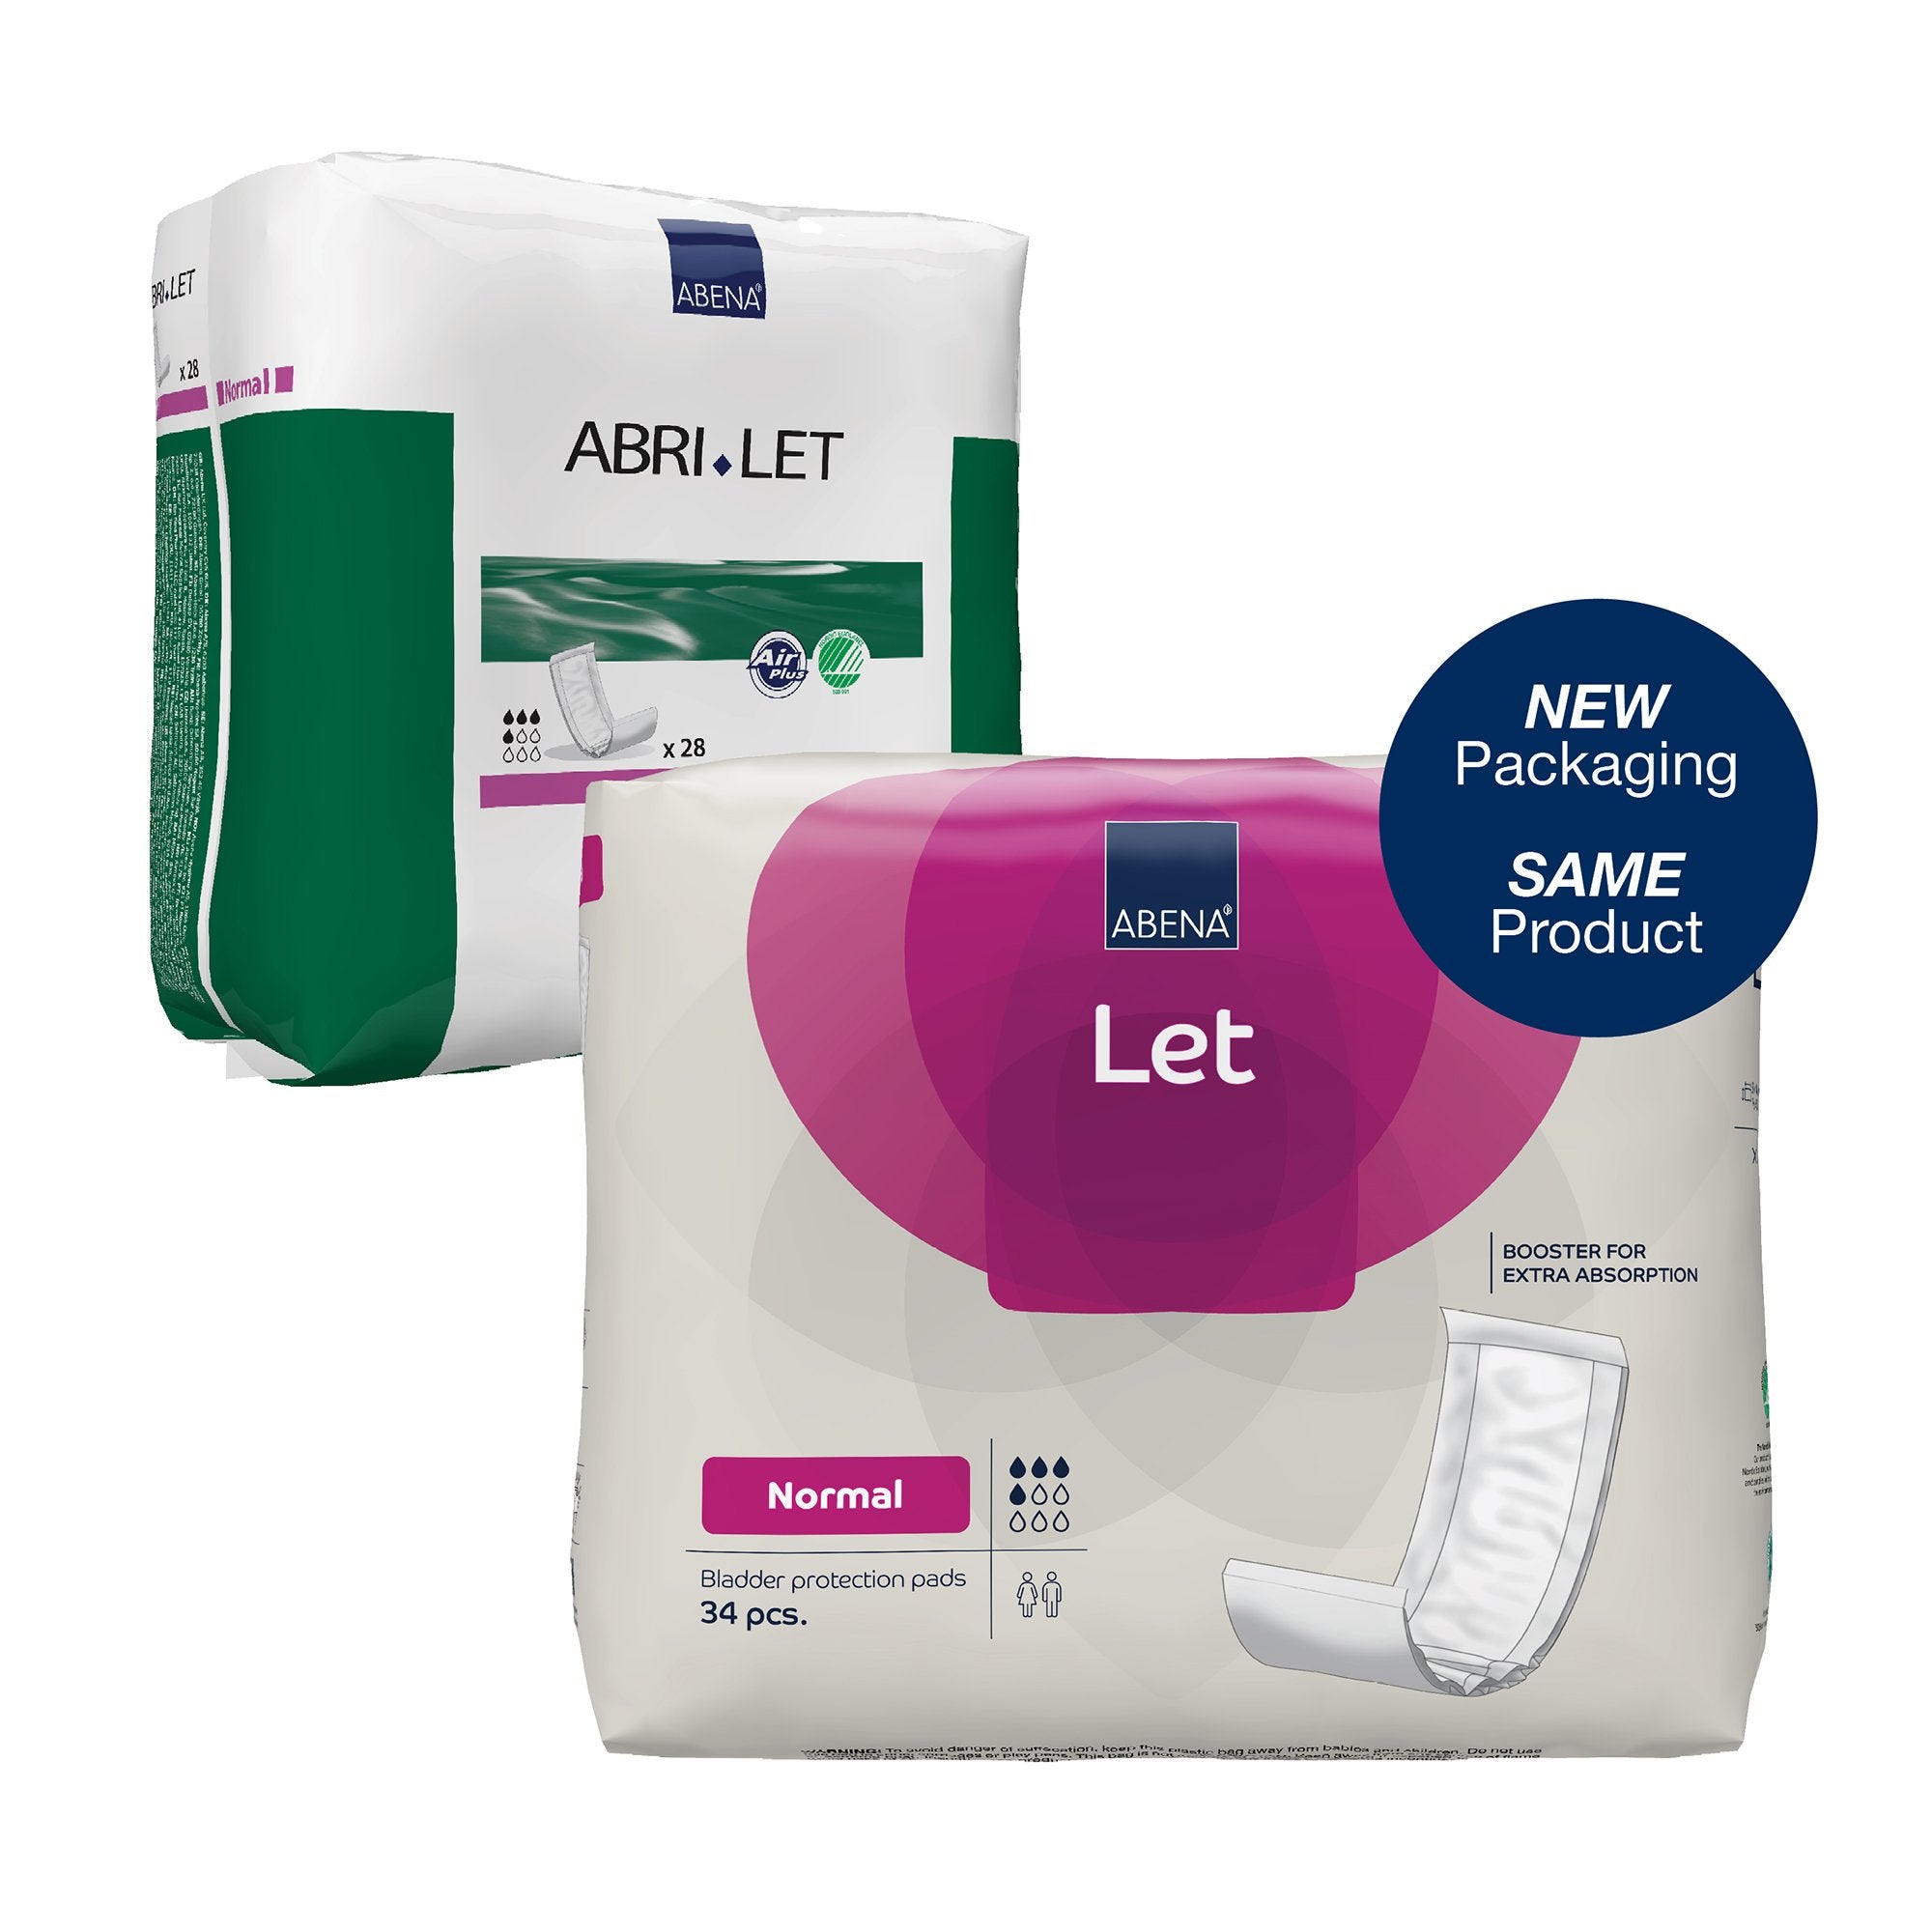 Booster Pad Abri-Let Normal 4 X 15 Inch Moderate Absorbency Fluff / Polymer Core One Size Fits Most